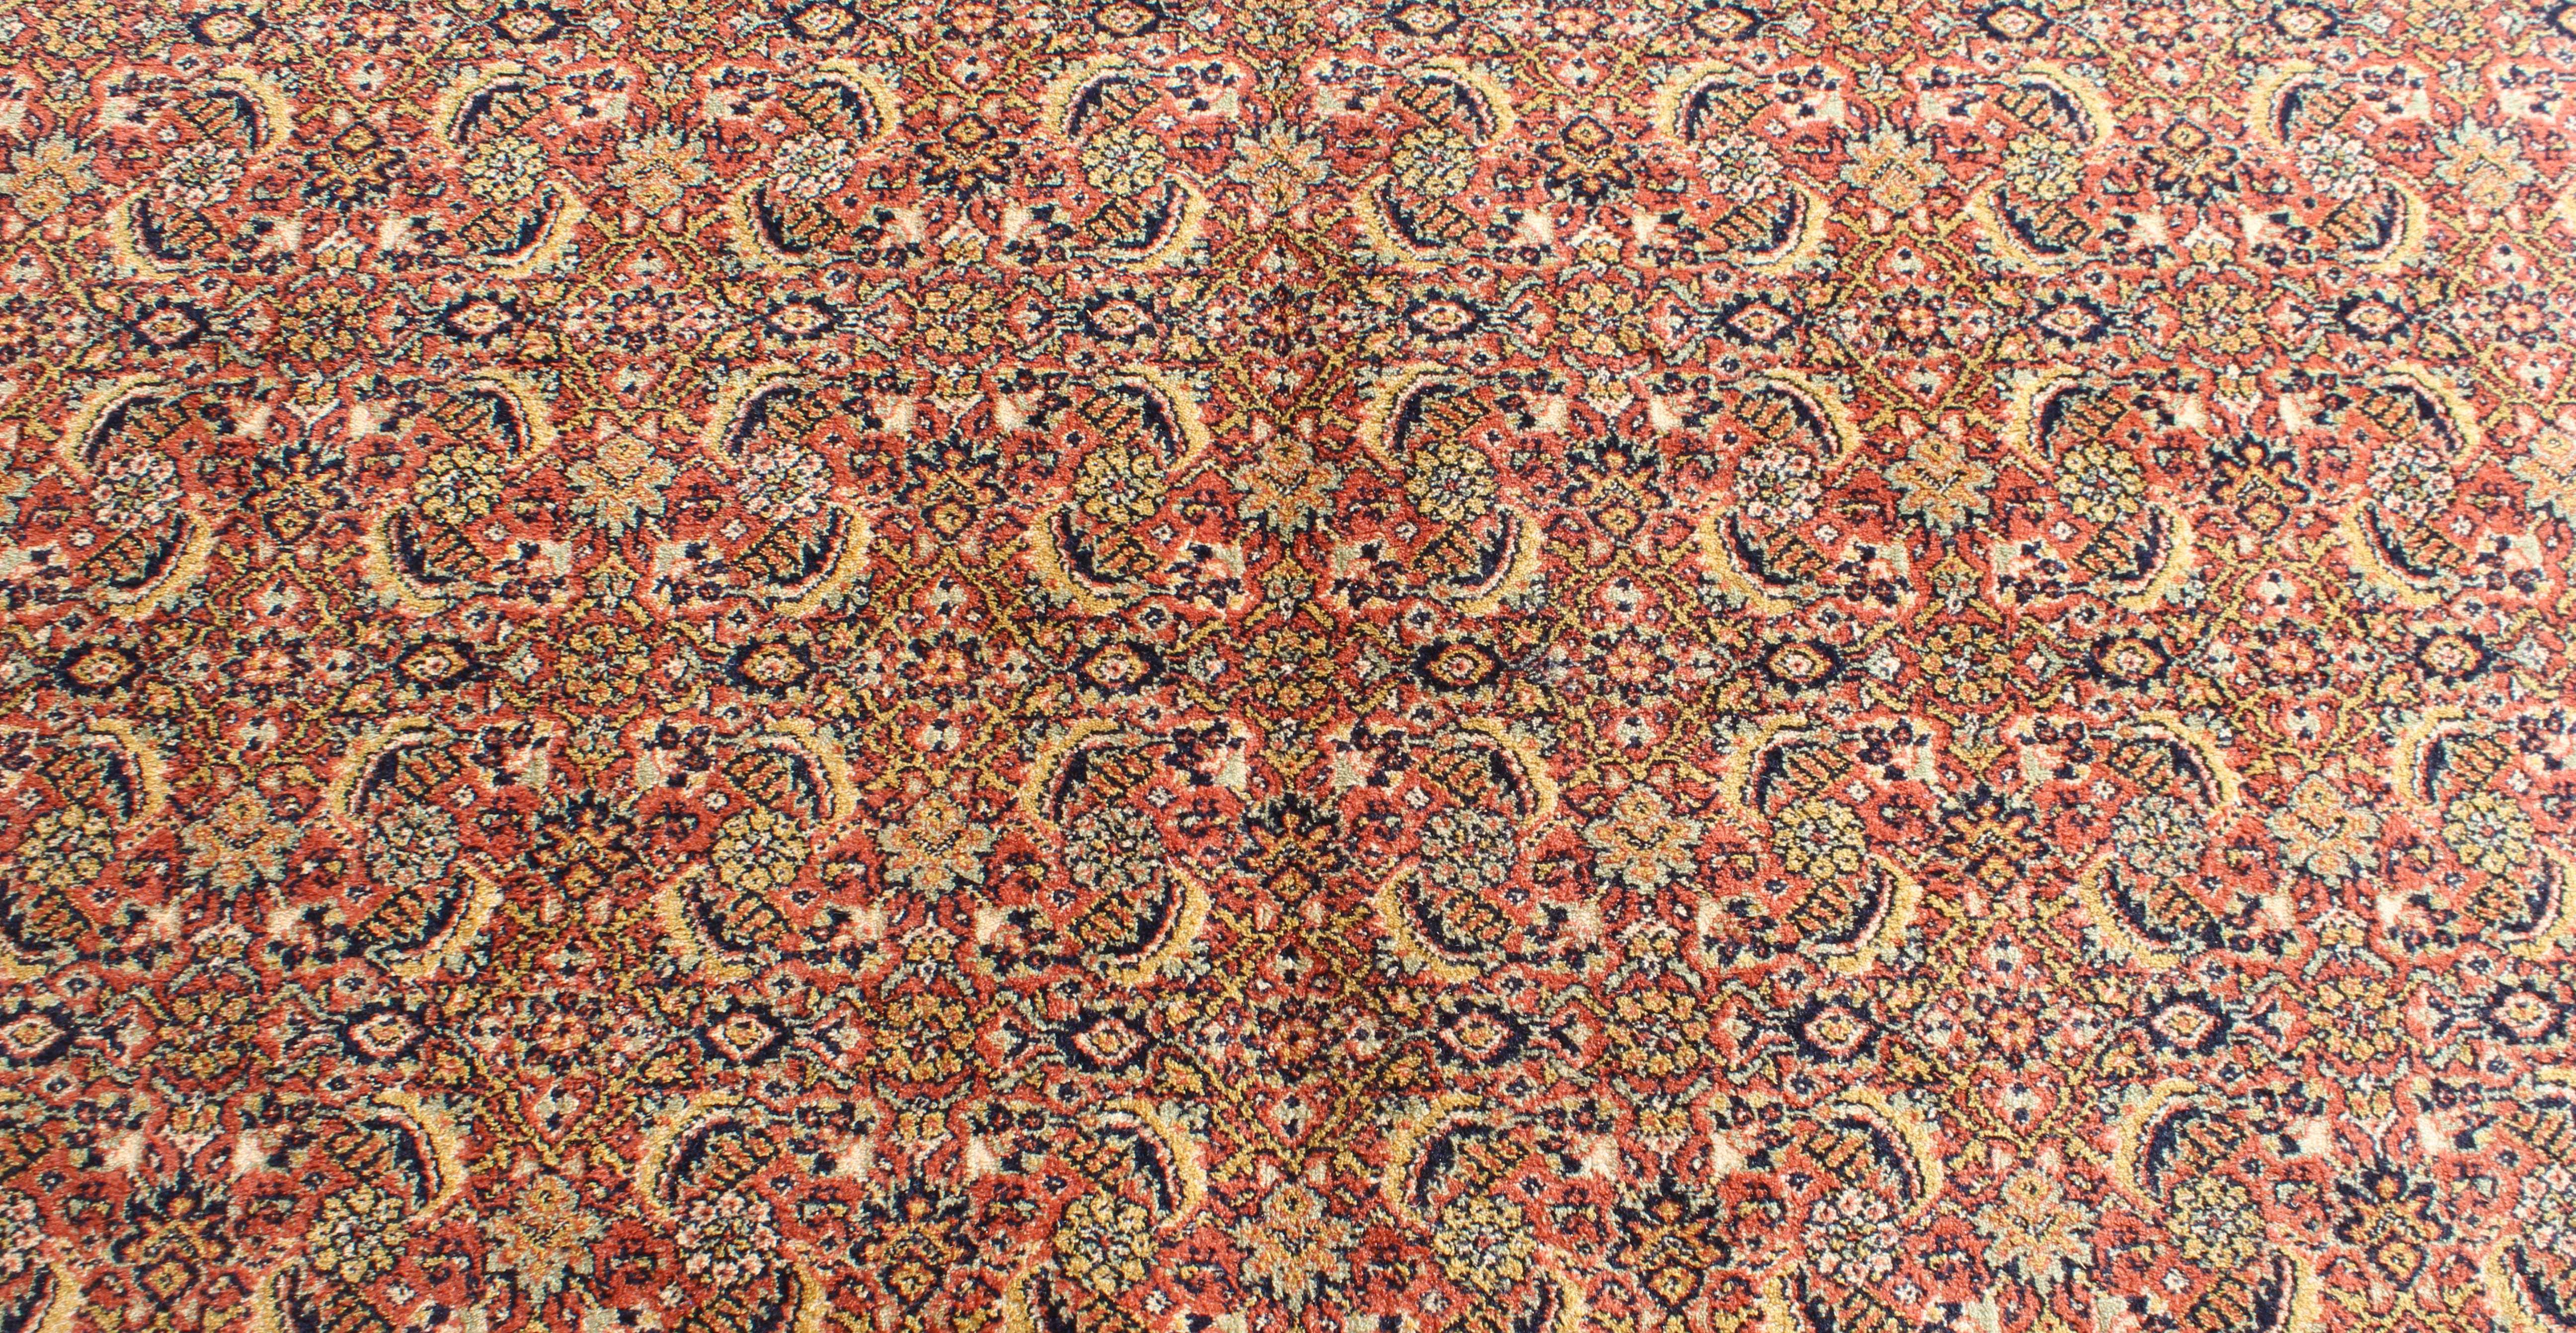 A modern, machine made large wool rug - 'Super Kashan' by Handmade Carpets Ltd. of Belgium, with a - Image 4 of 4